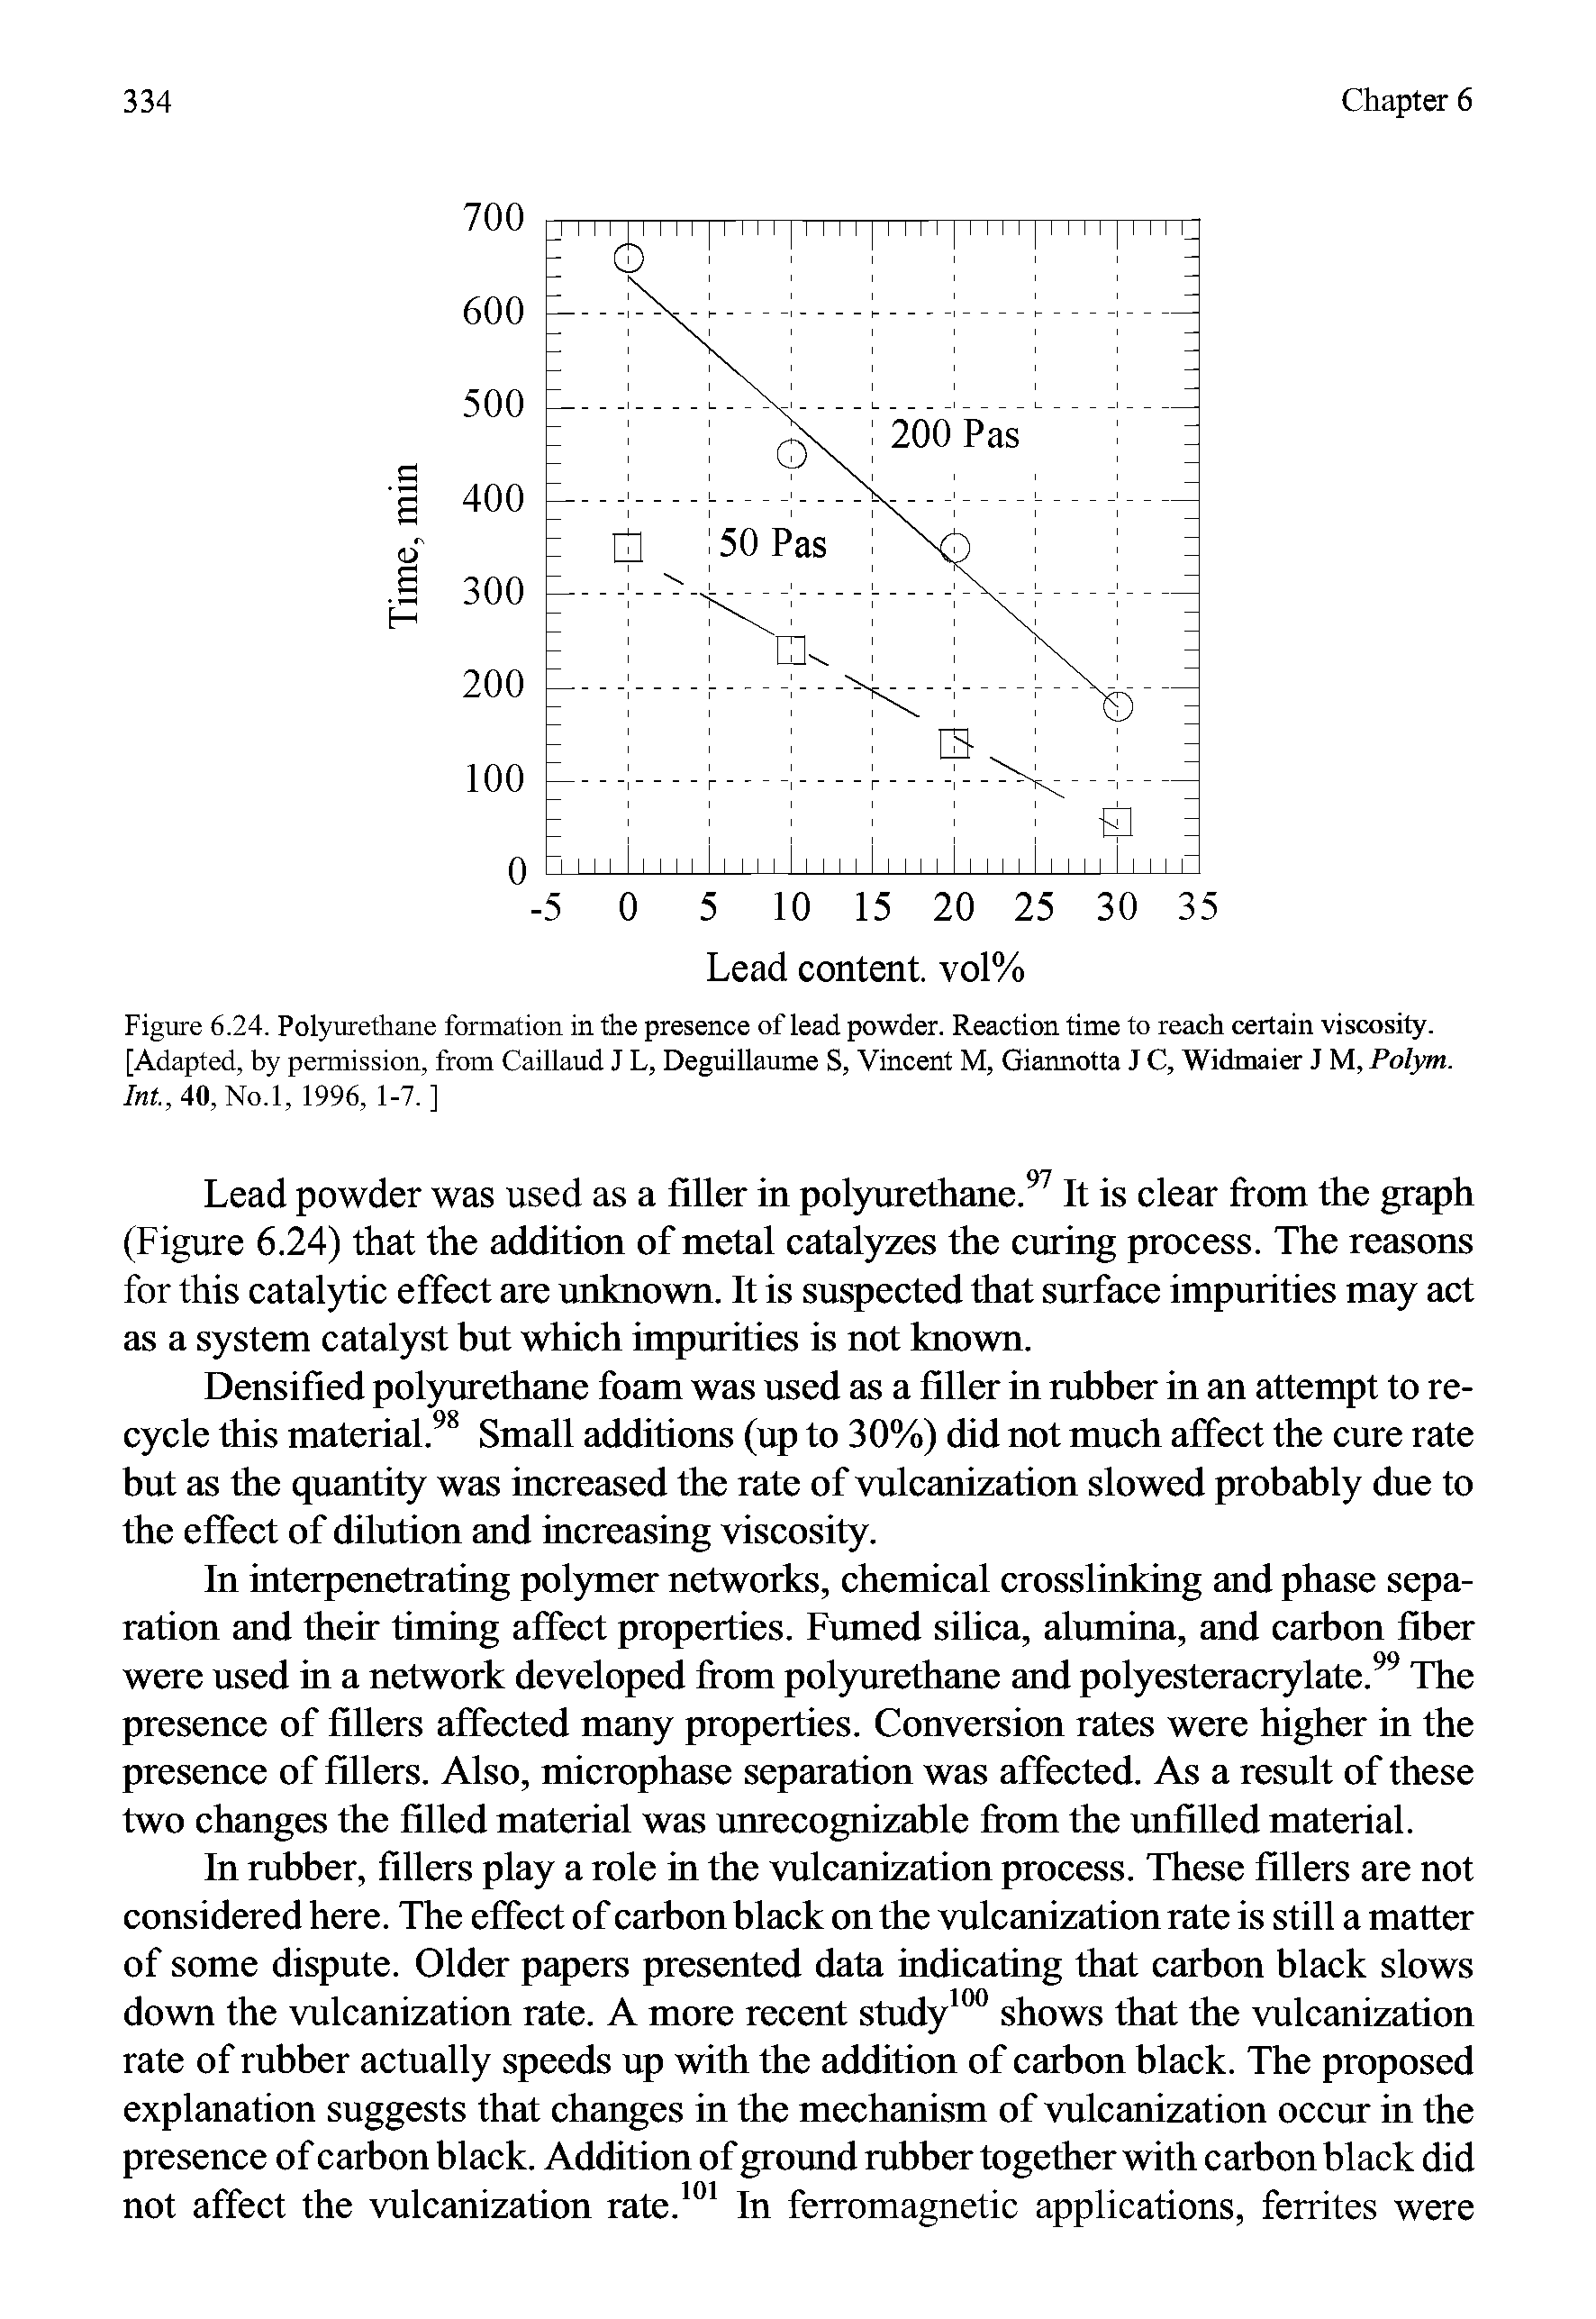 Figure 6.24. Polyurethane formation in the presence of lead powder. Reaction time to reach certain viscosity. [Adapted, by permission, from Caillaud J L, Deguillaume S, Vincent M, Giarmotta J C, Widmaier J M, Polym. / /.,40, No.l, 1996, 1-7.]...